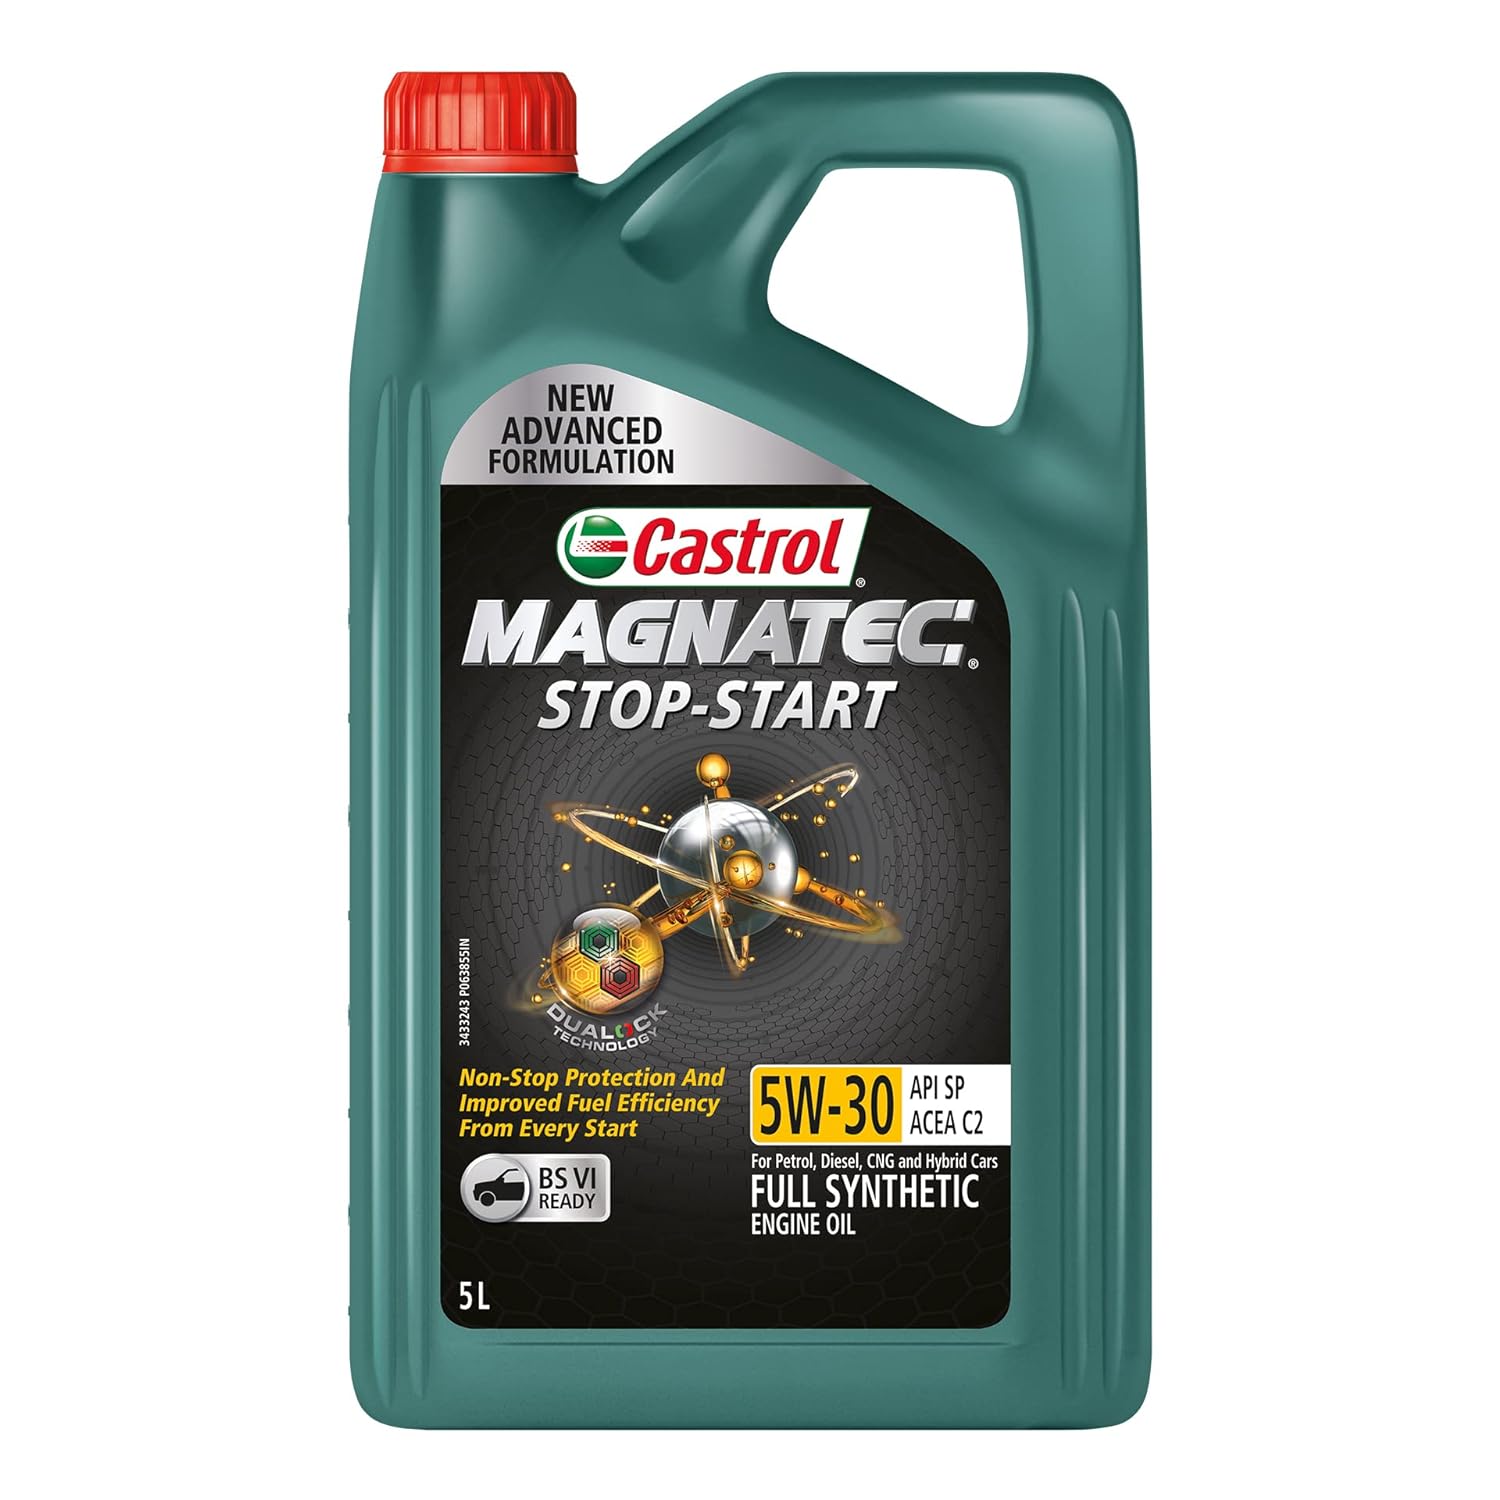 Best Pennzoil Synthetic Oil for Your Car: This Expert Review Tells You What You Need to Know